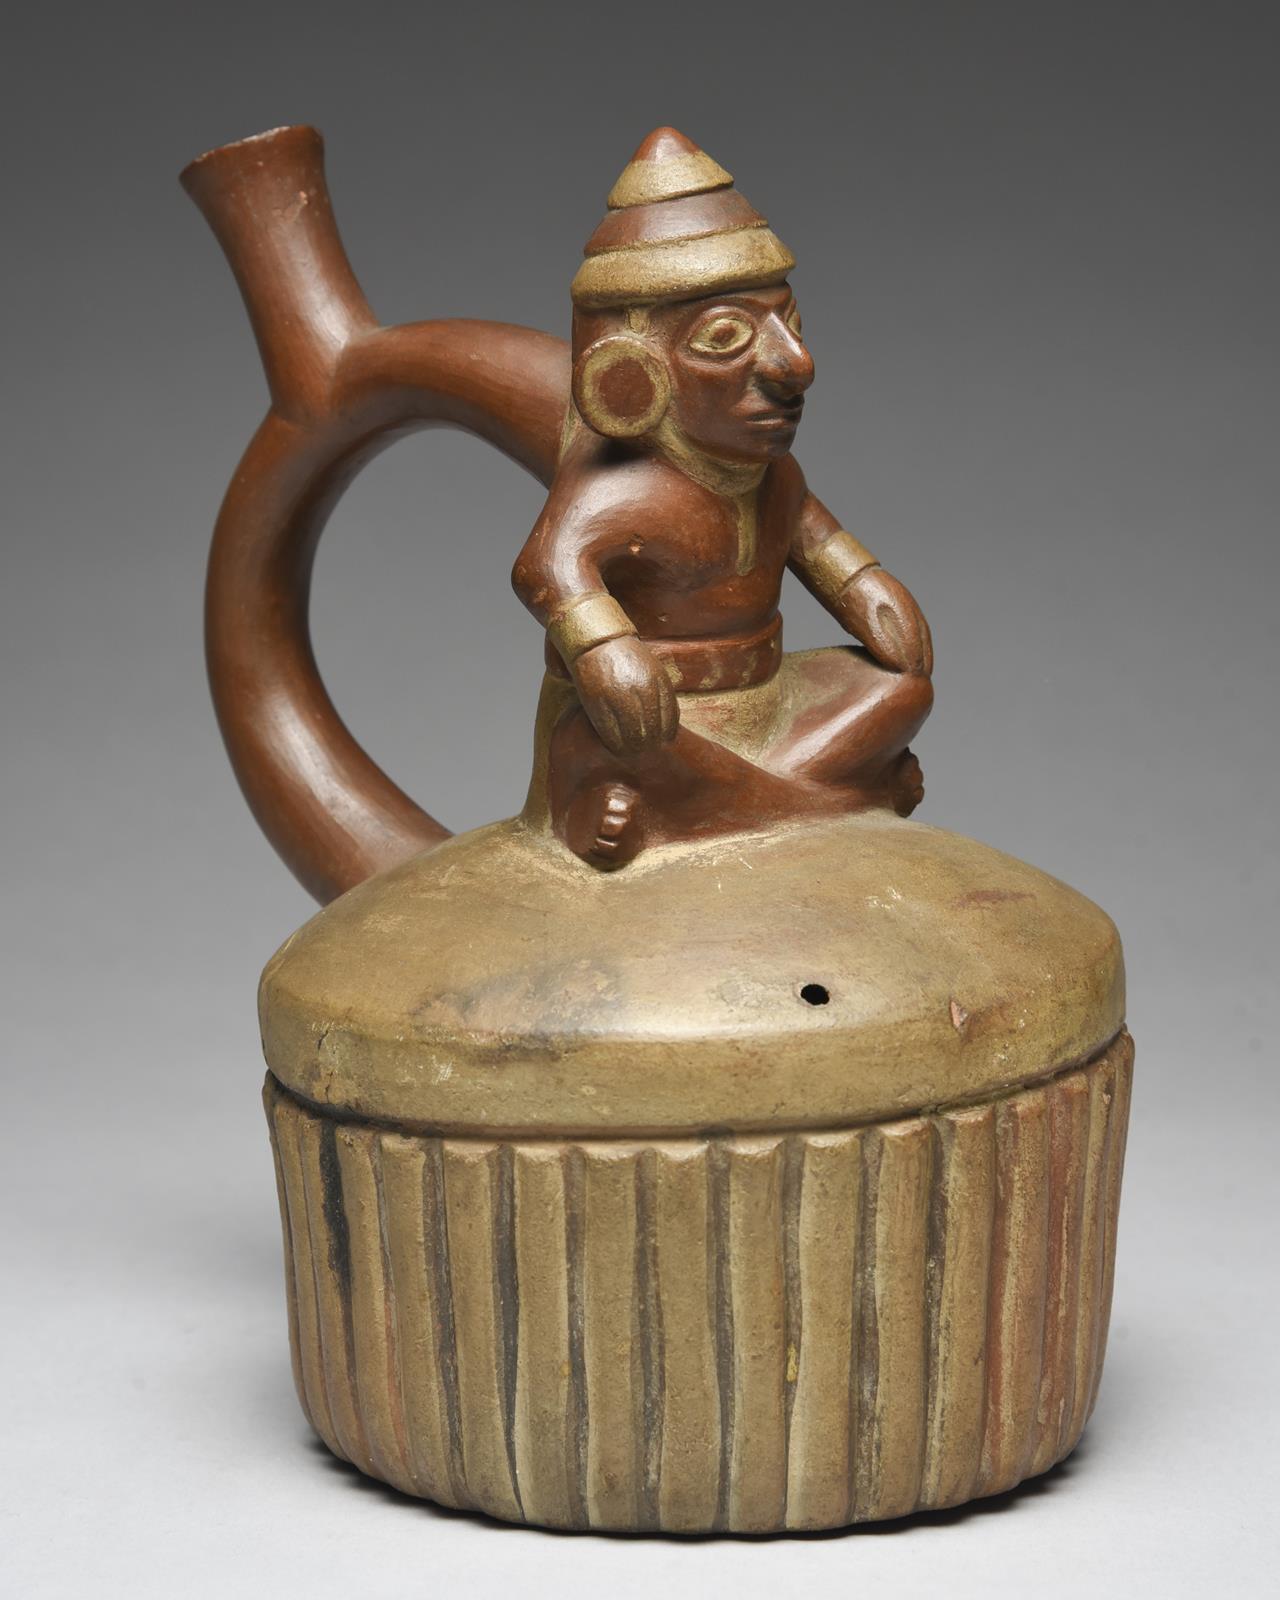 A Moche stirrup spout vessel Peru, circa 400 - 700 AD of circular ribbed form with a domed top - Image 4 of 5